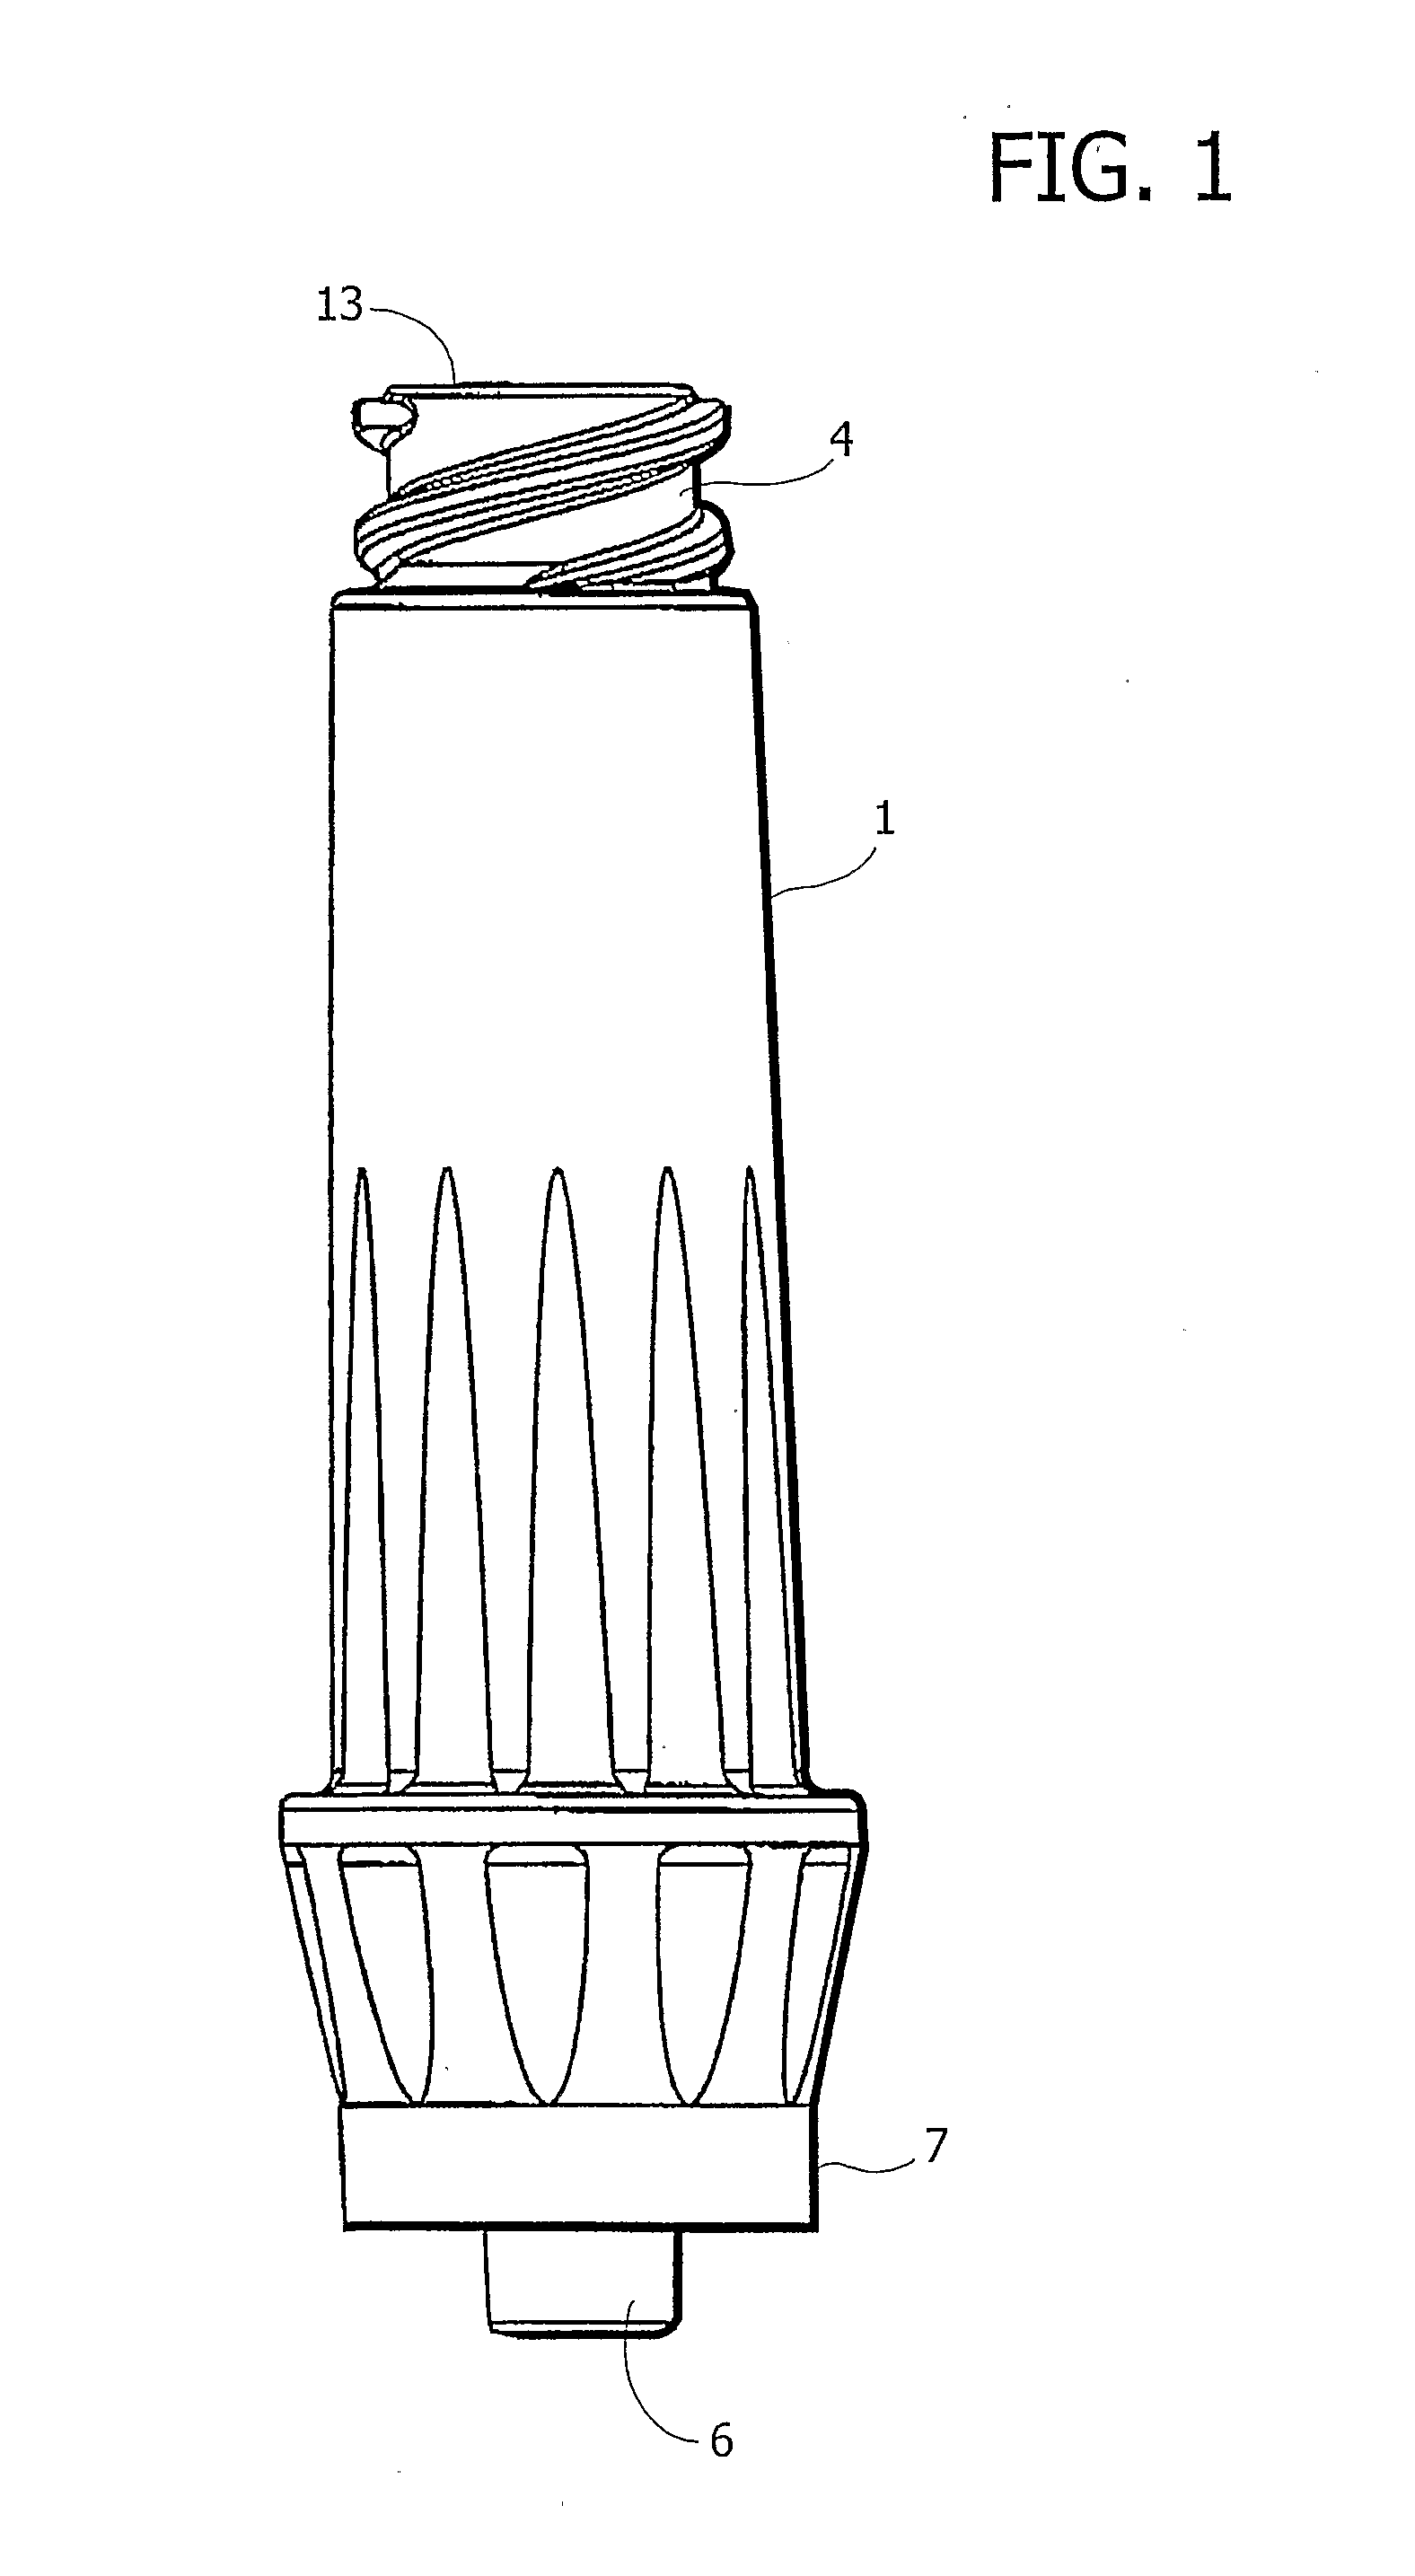 Valve Connector For Medical Infusion Lines